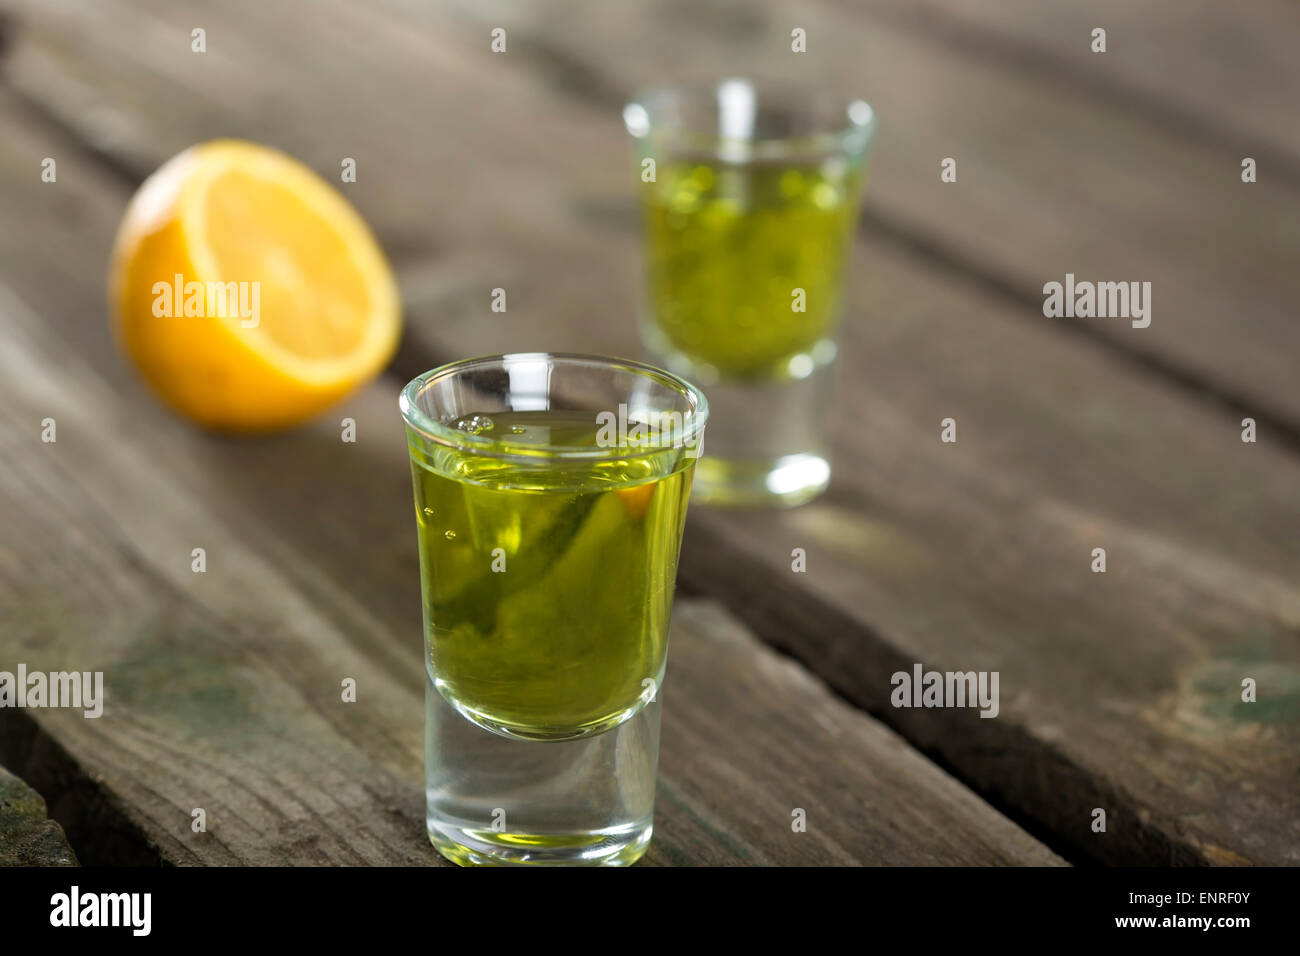 Two shot glasses of absinthe liqueur over wood background Stock Photo